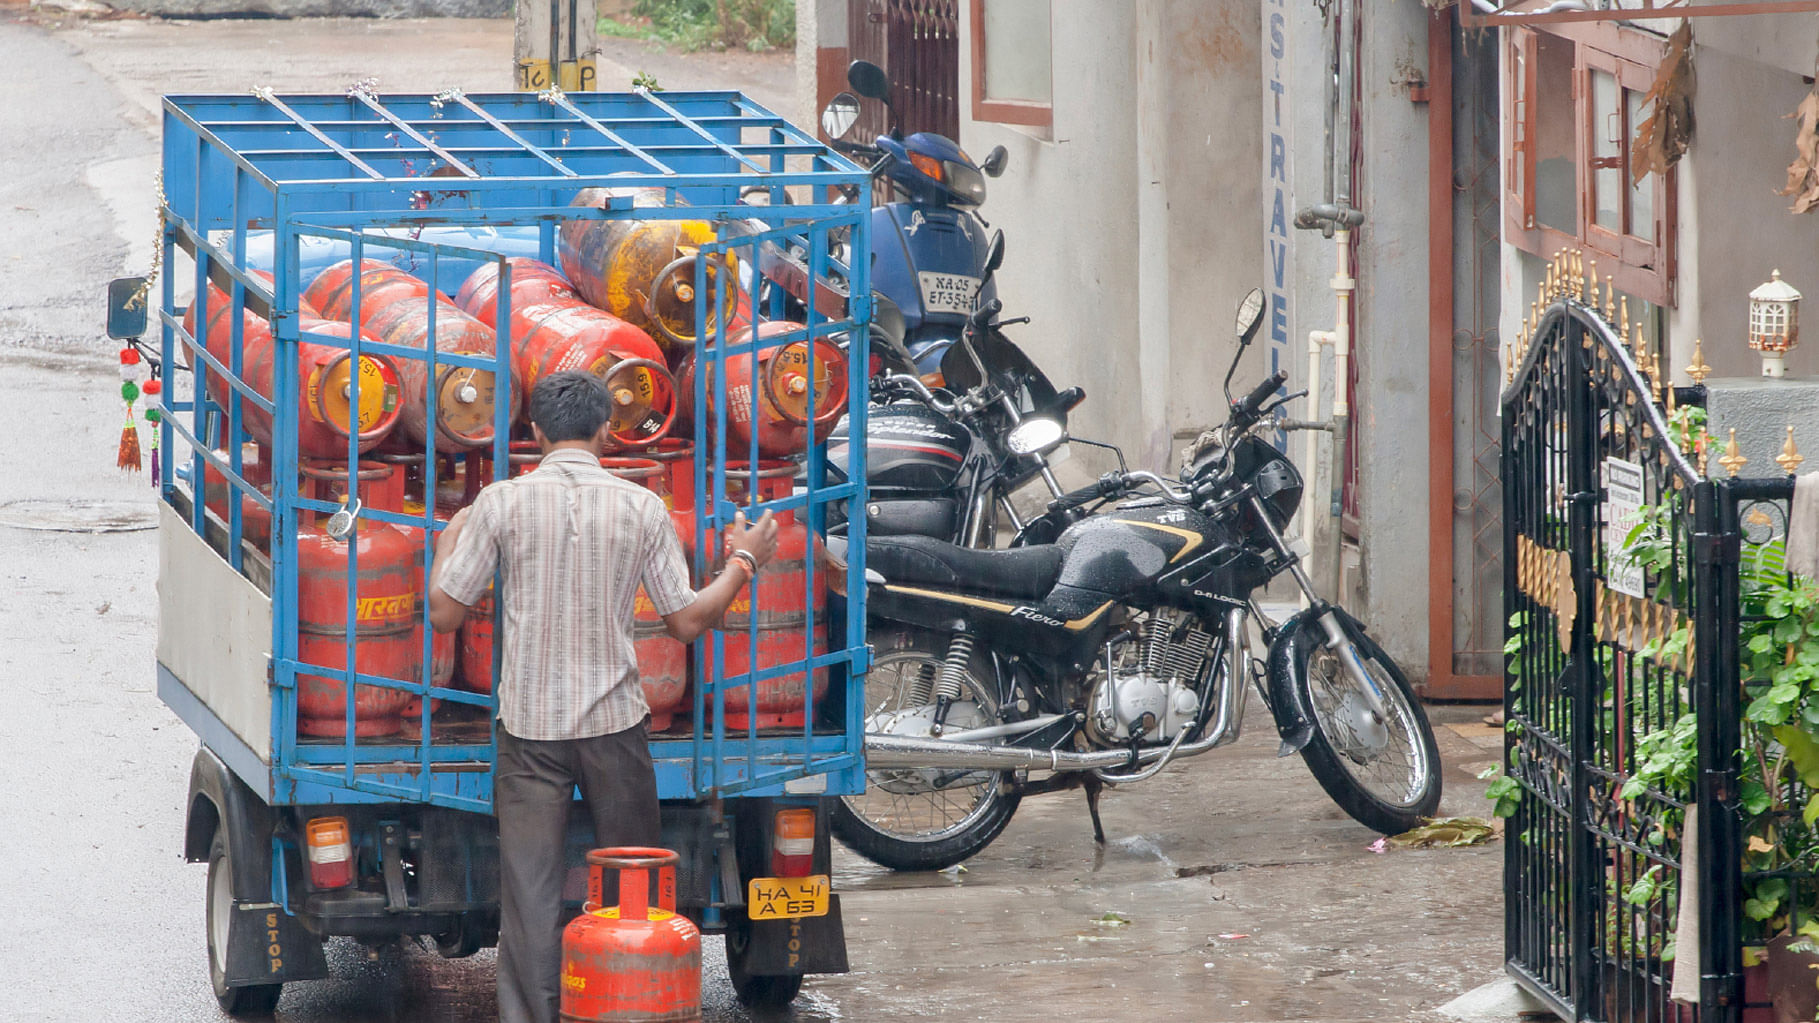 

An employee of a petroleum company delivers an LPG cylinder at a home in Bengaluru. (File photo: iStock)